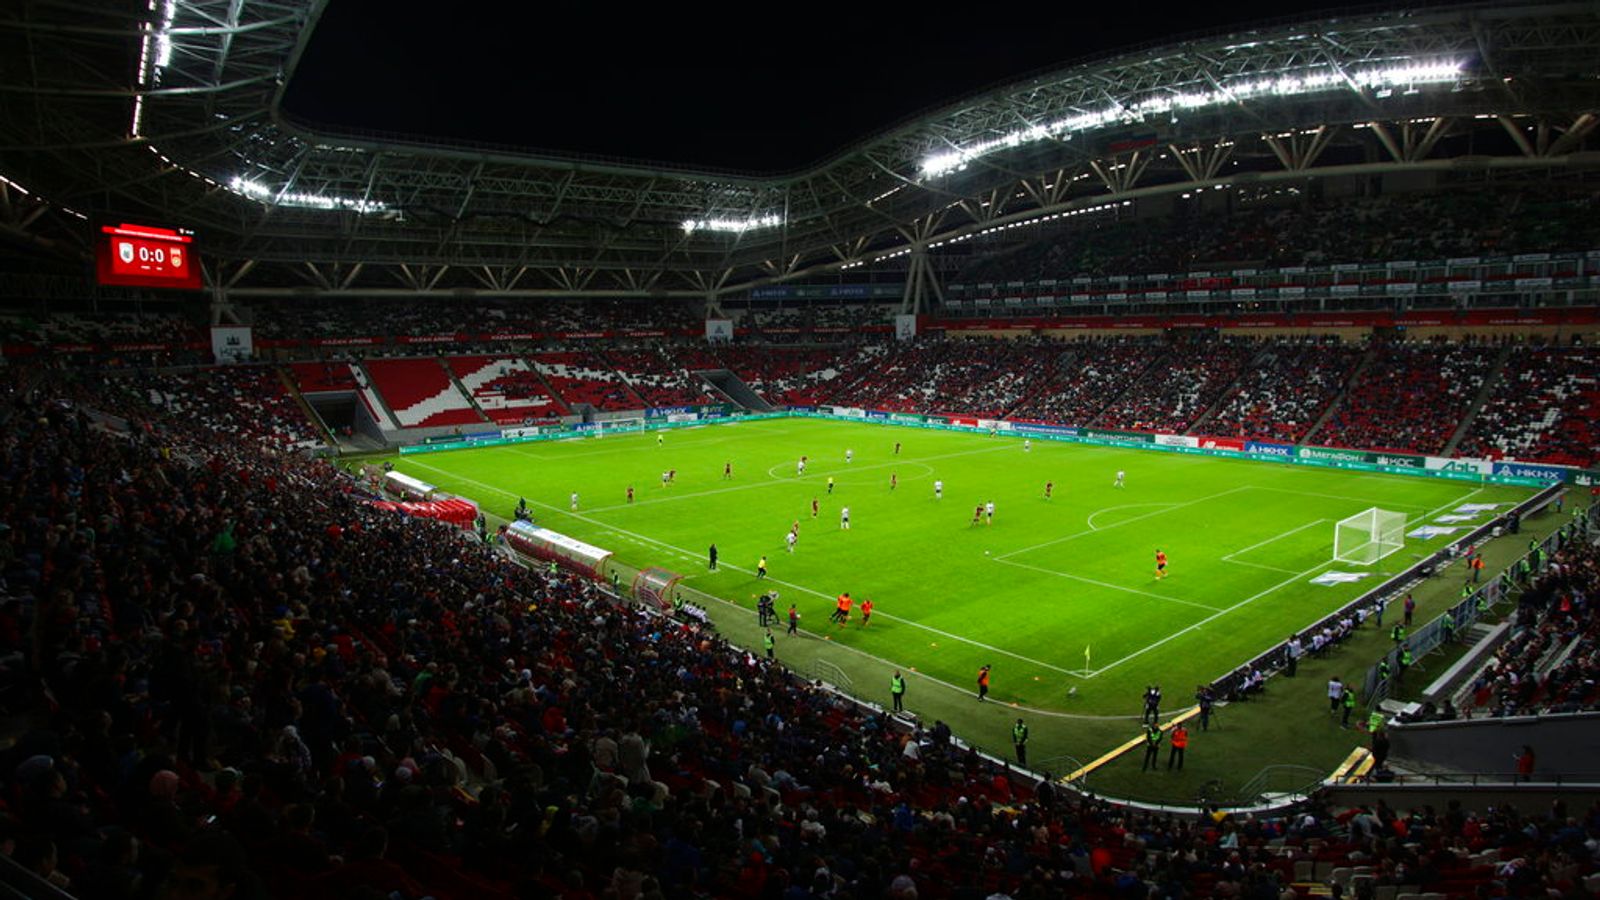 Russia teams suspended from international soccer